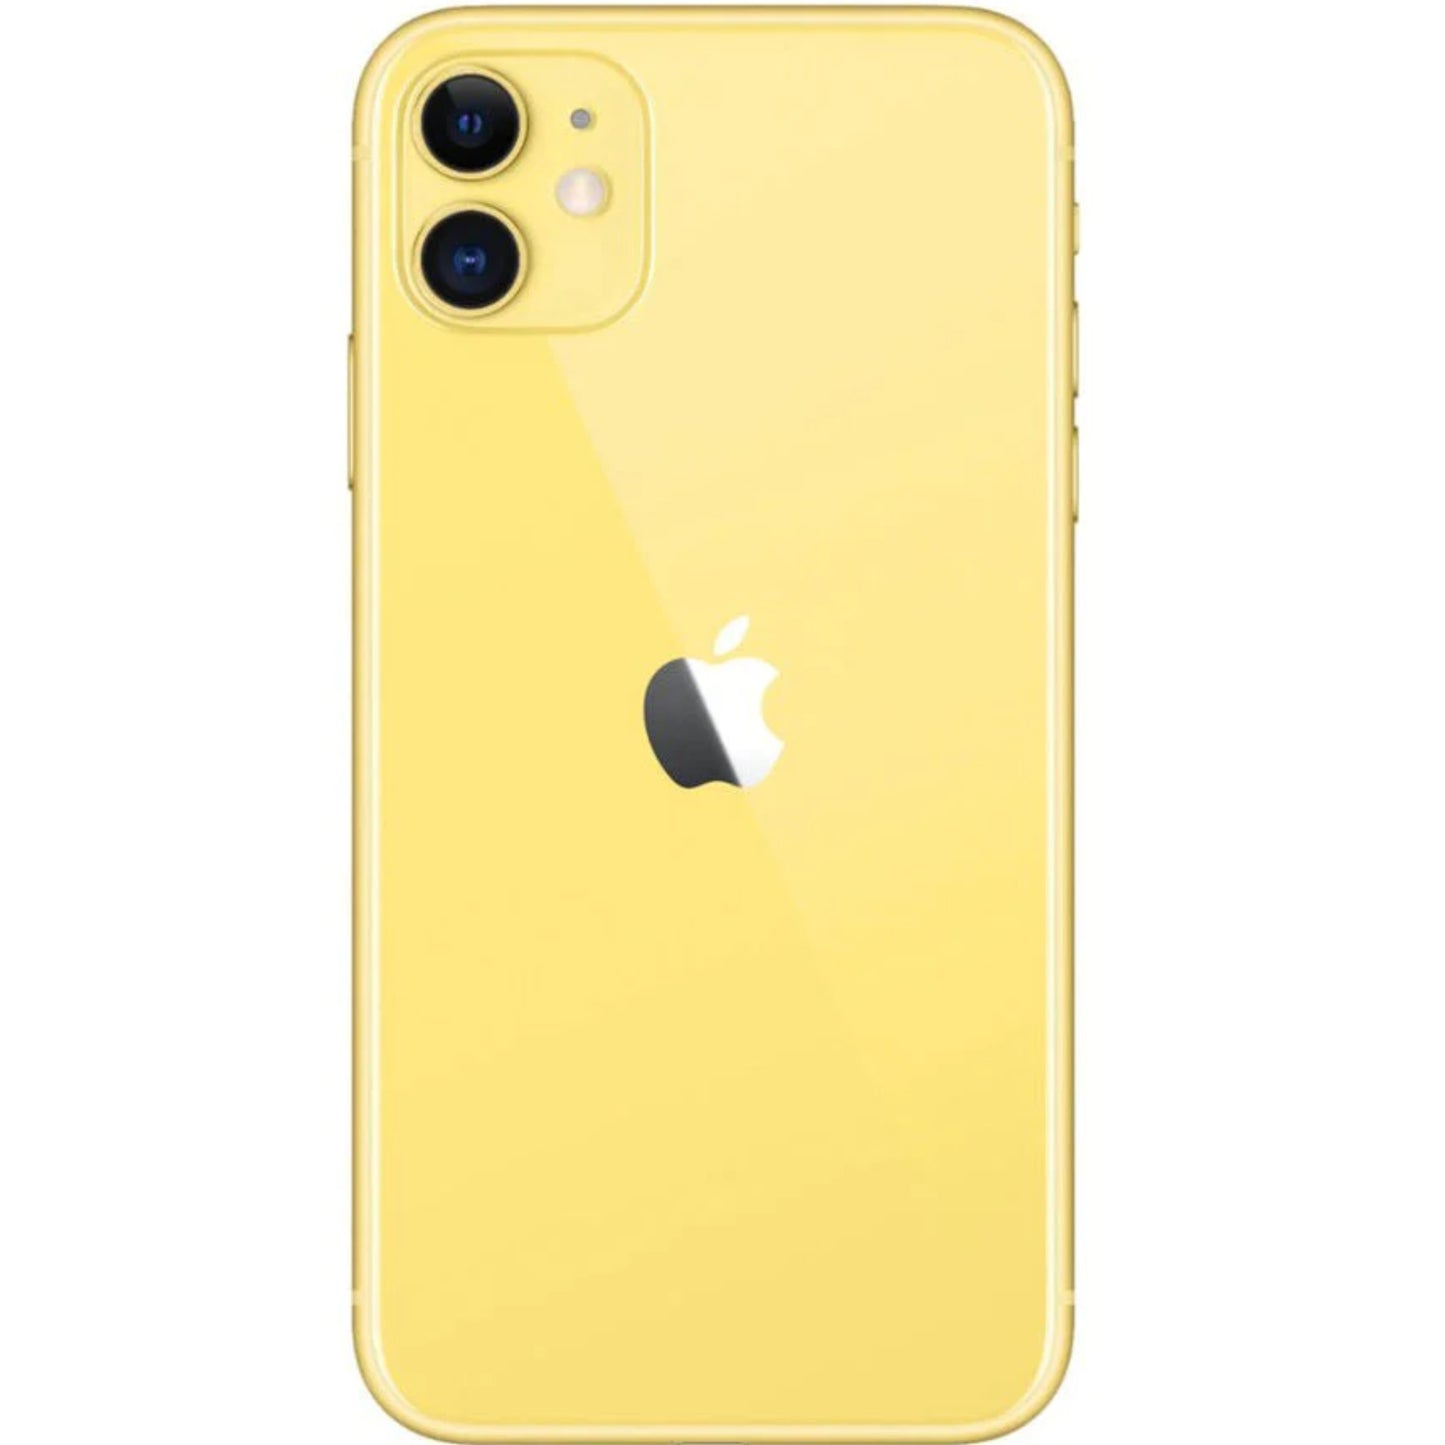 Apple Iphone 11 128GB Yellow Pre Owned A Grade Condition